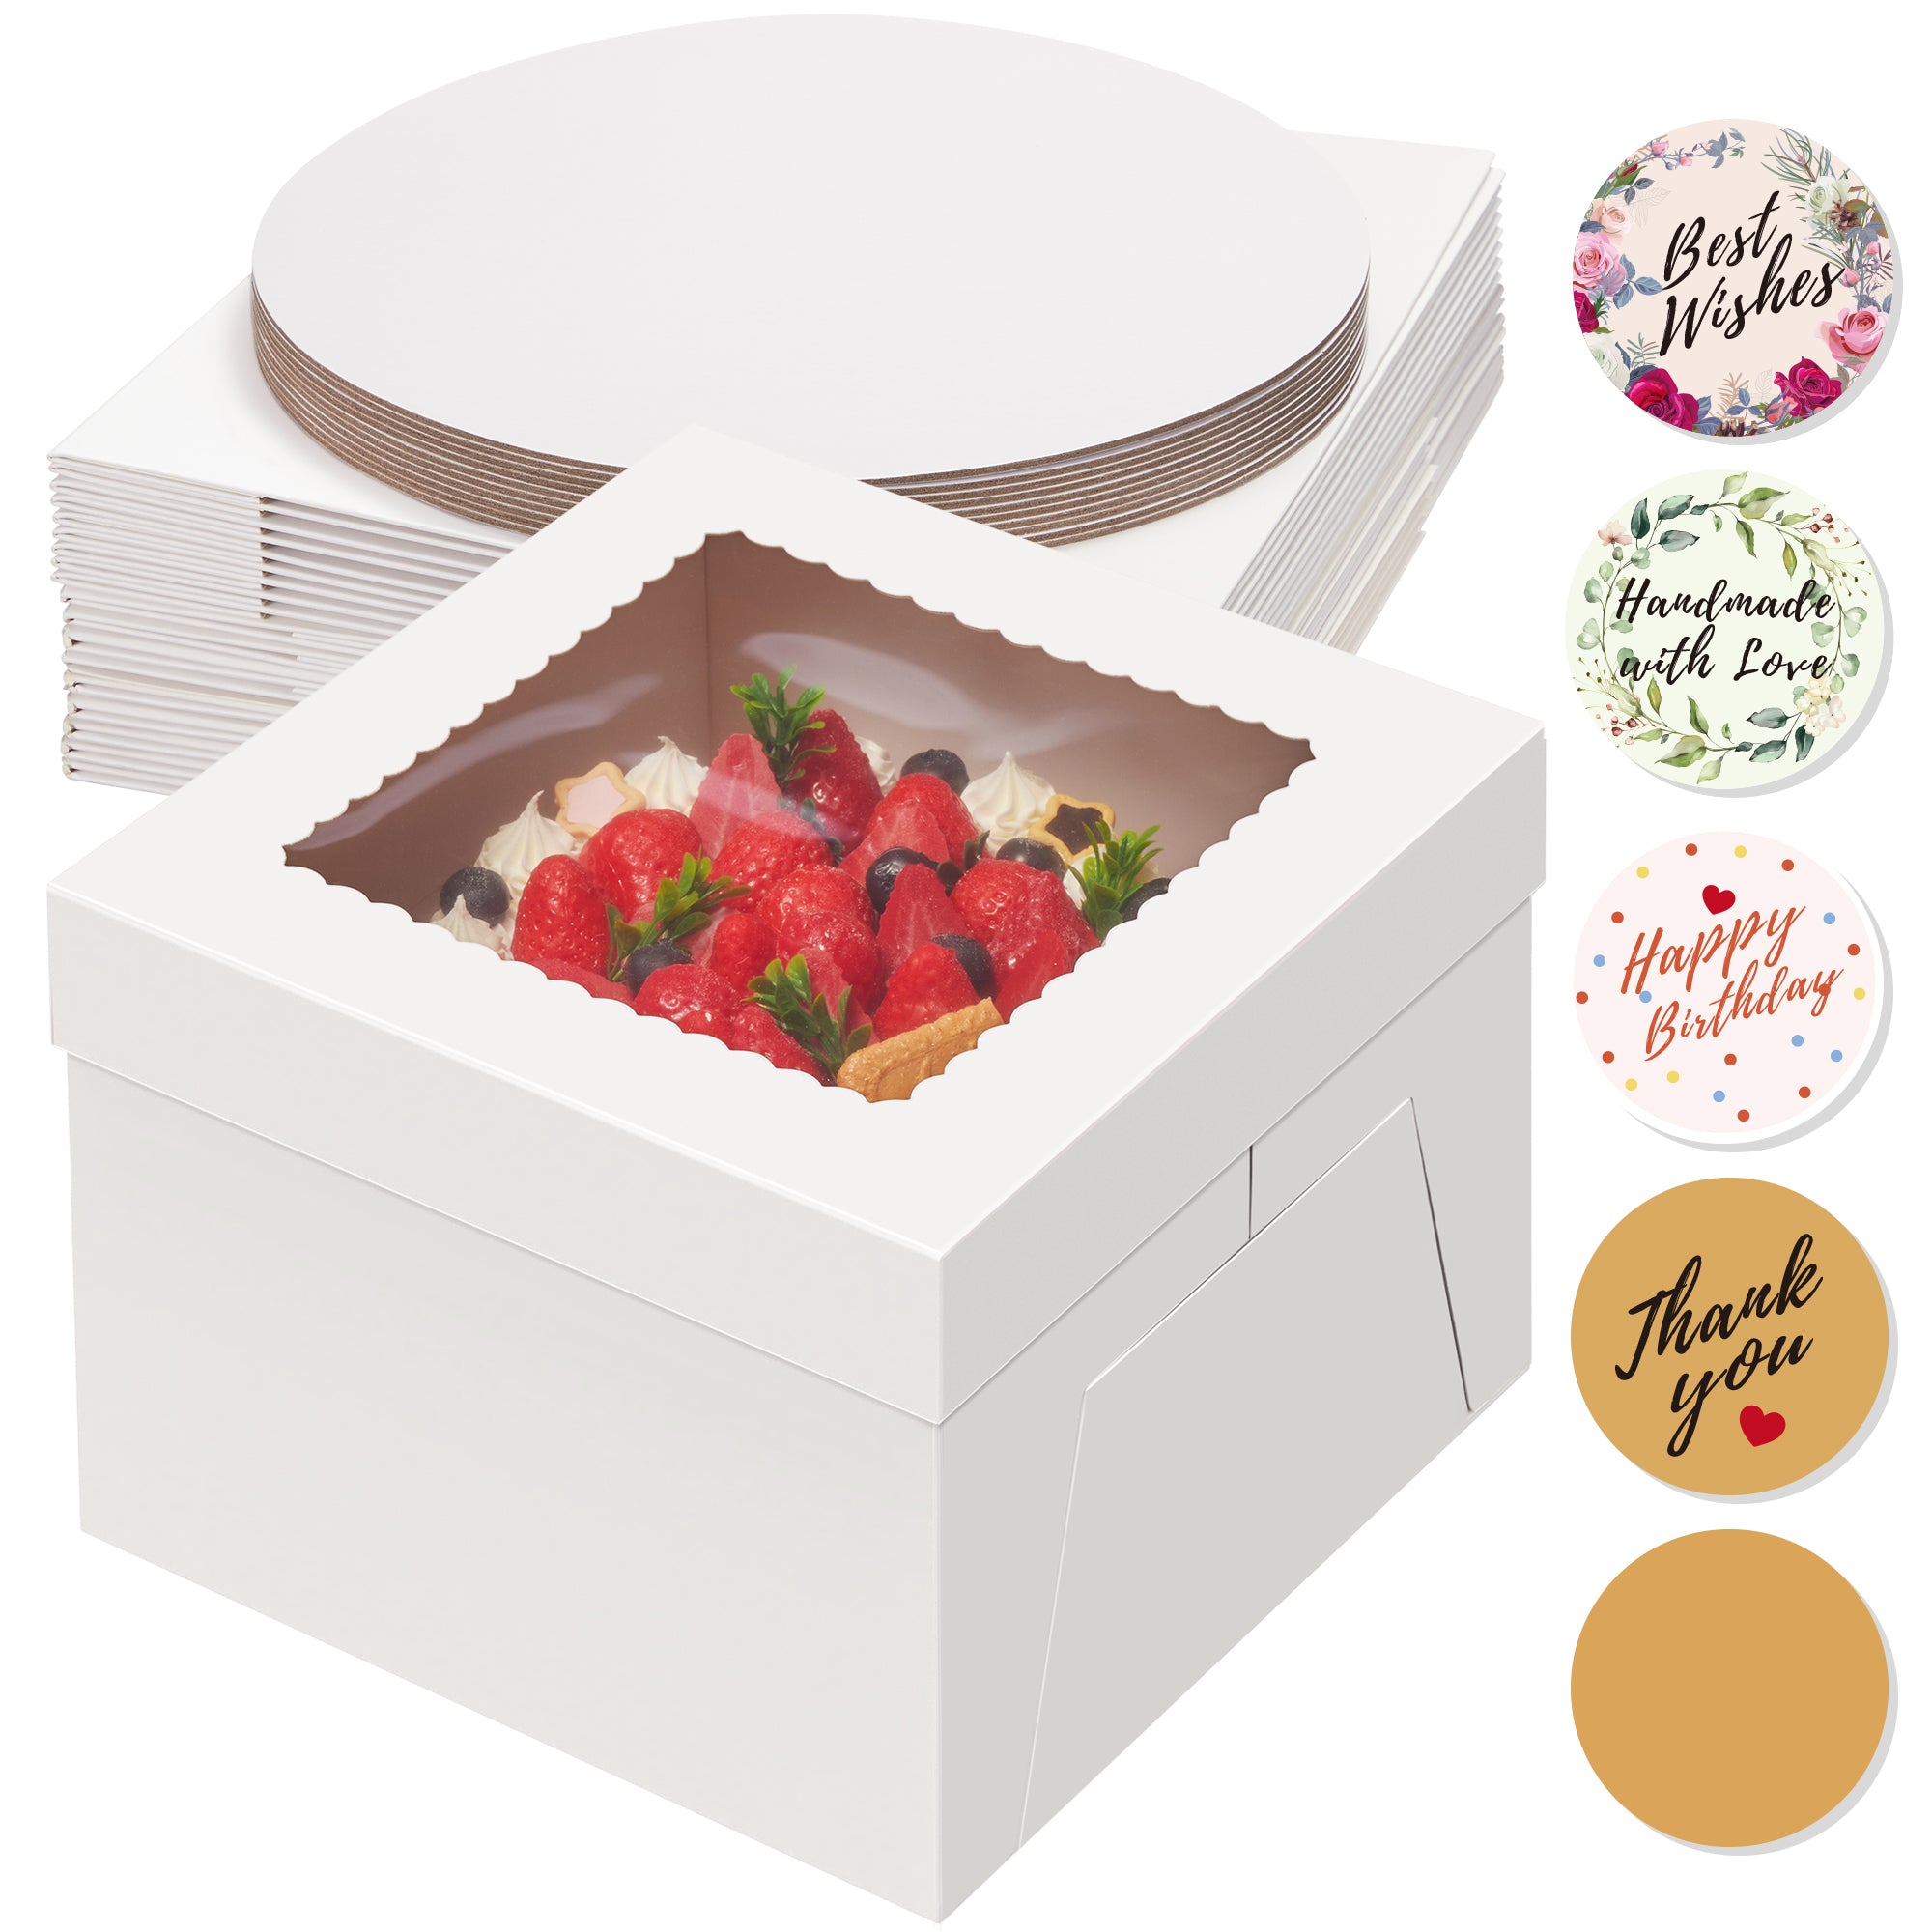 Kootek Cake Boxes with Cake Boards (10 Boxes & 10 Boards), 10x10x8 Inches White Bakery Box with Window, Large Baking Boxes, Square Cake Box for Multi-Layer Cakes, Pastries, Cake Decorating Supplies